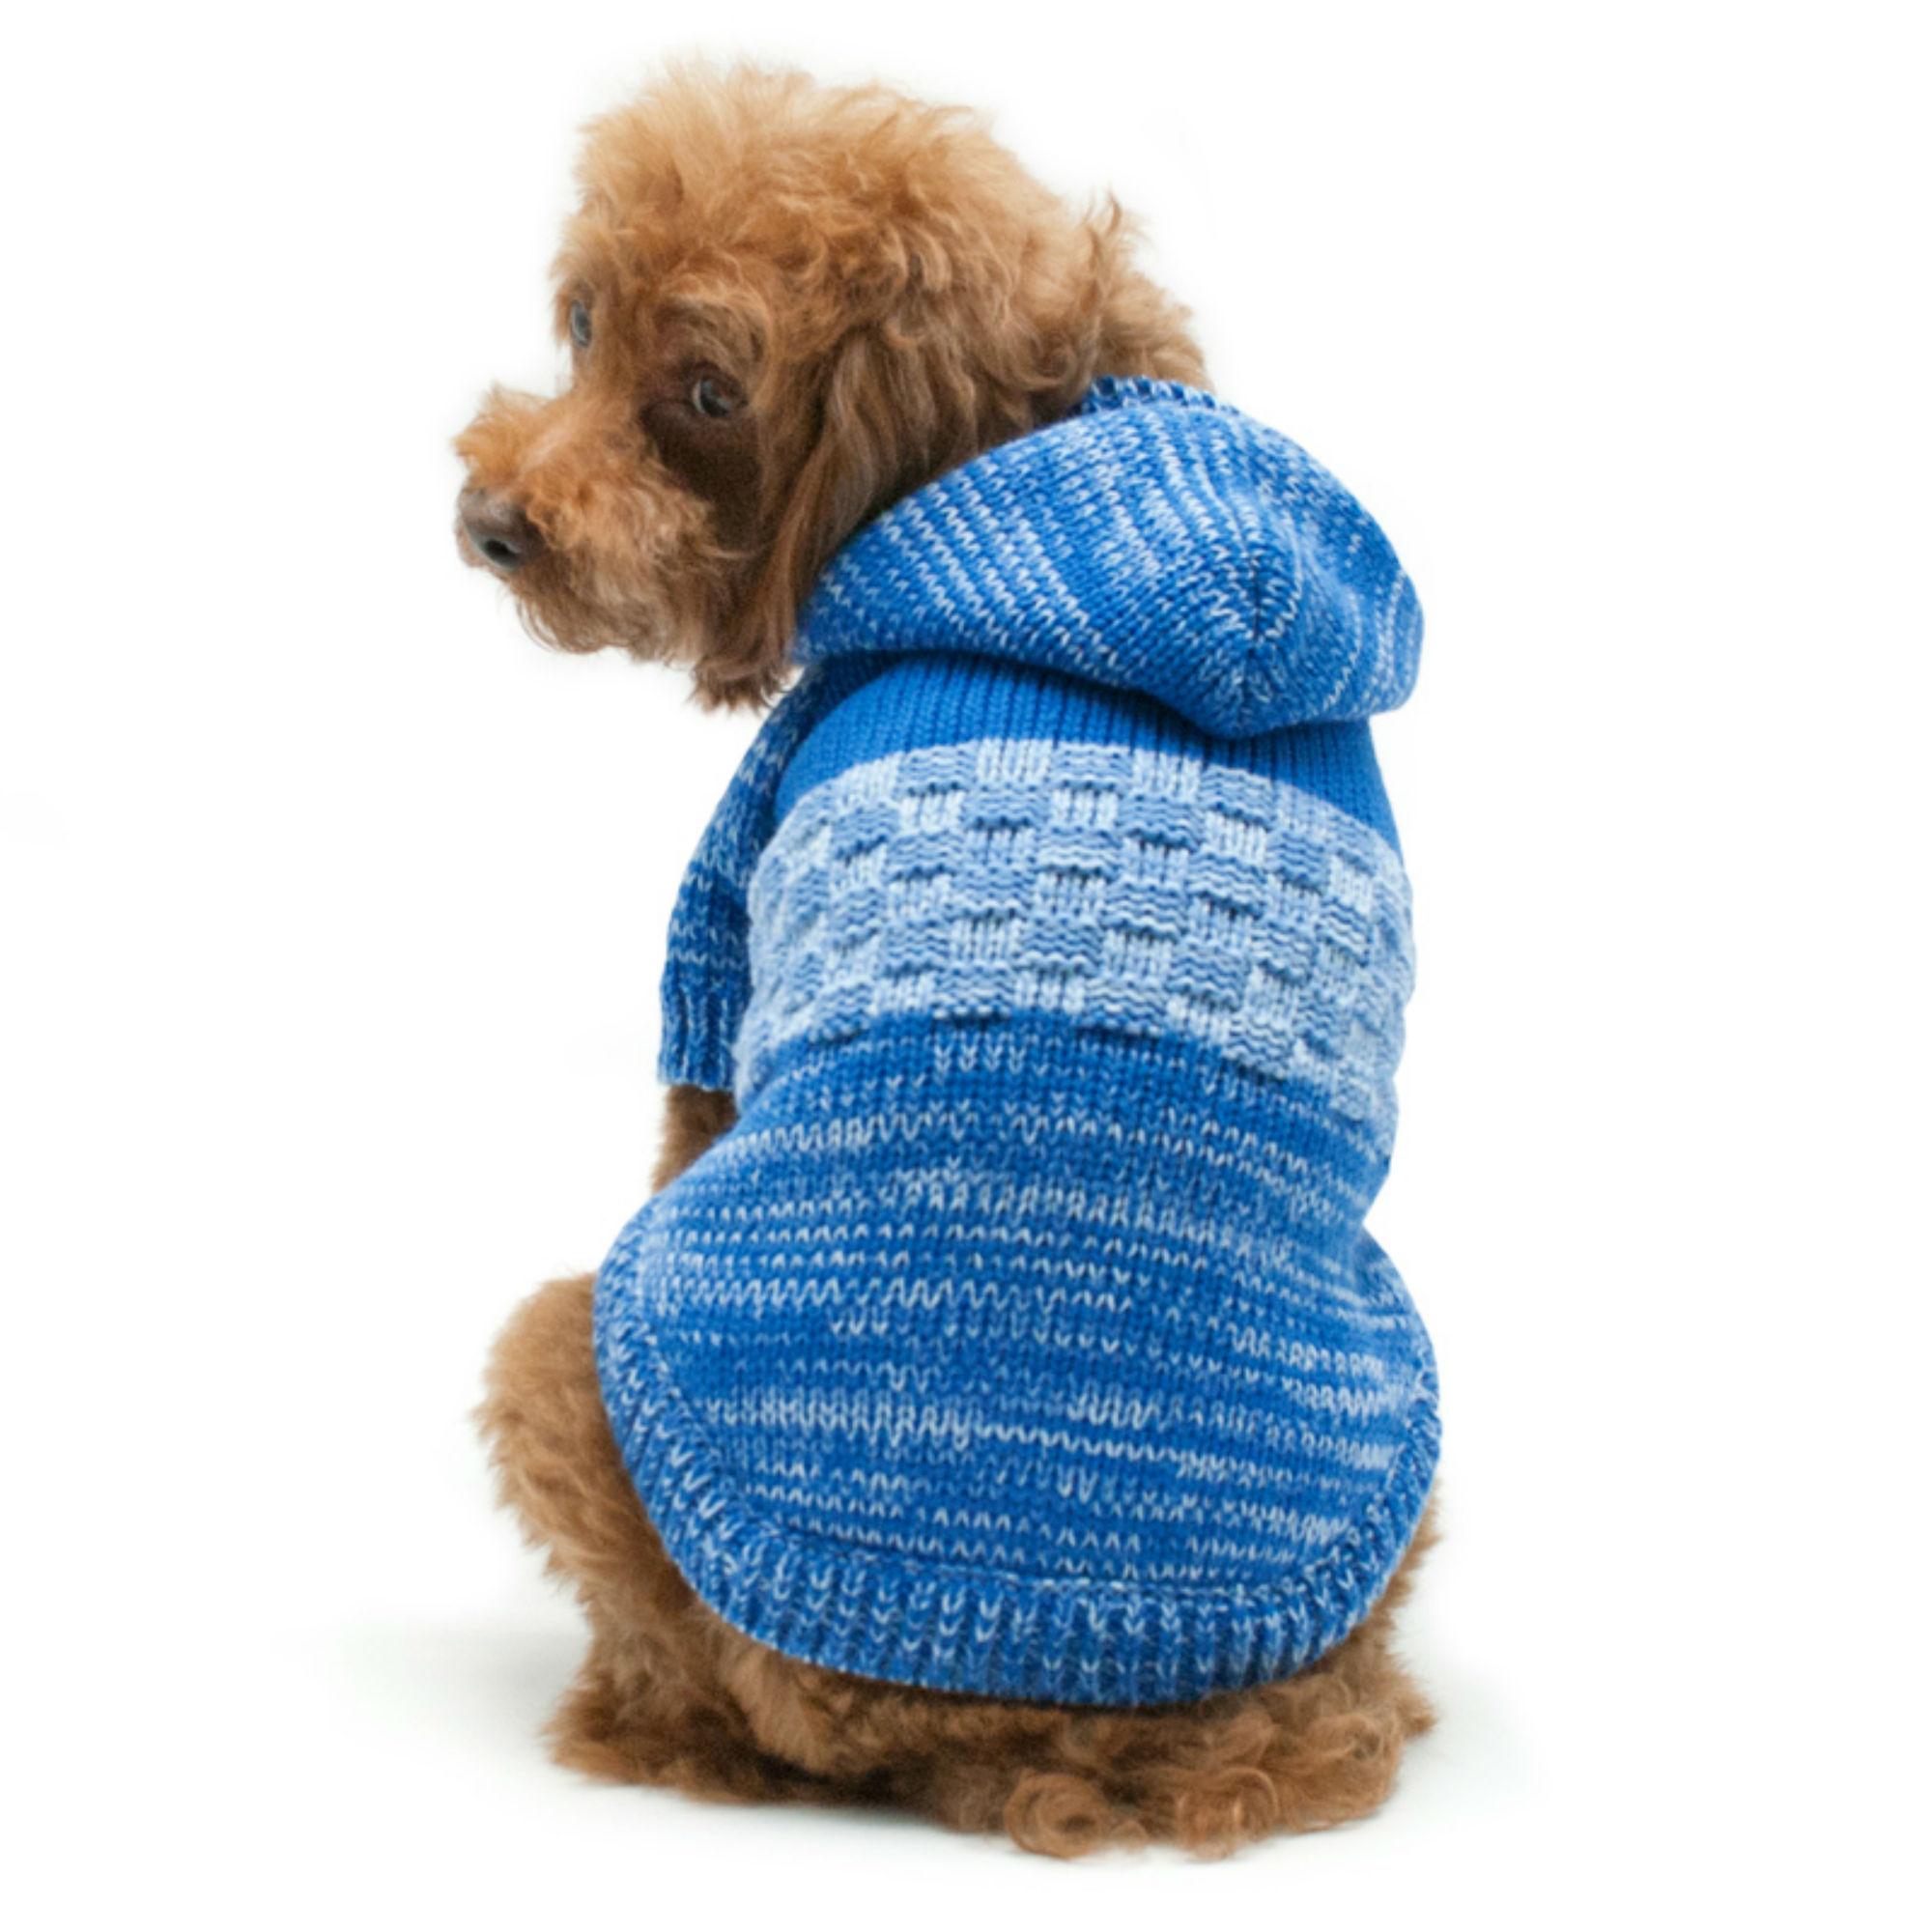 Colorblock Sweater Dog Coat by Dogo - Blue